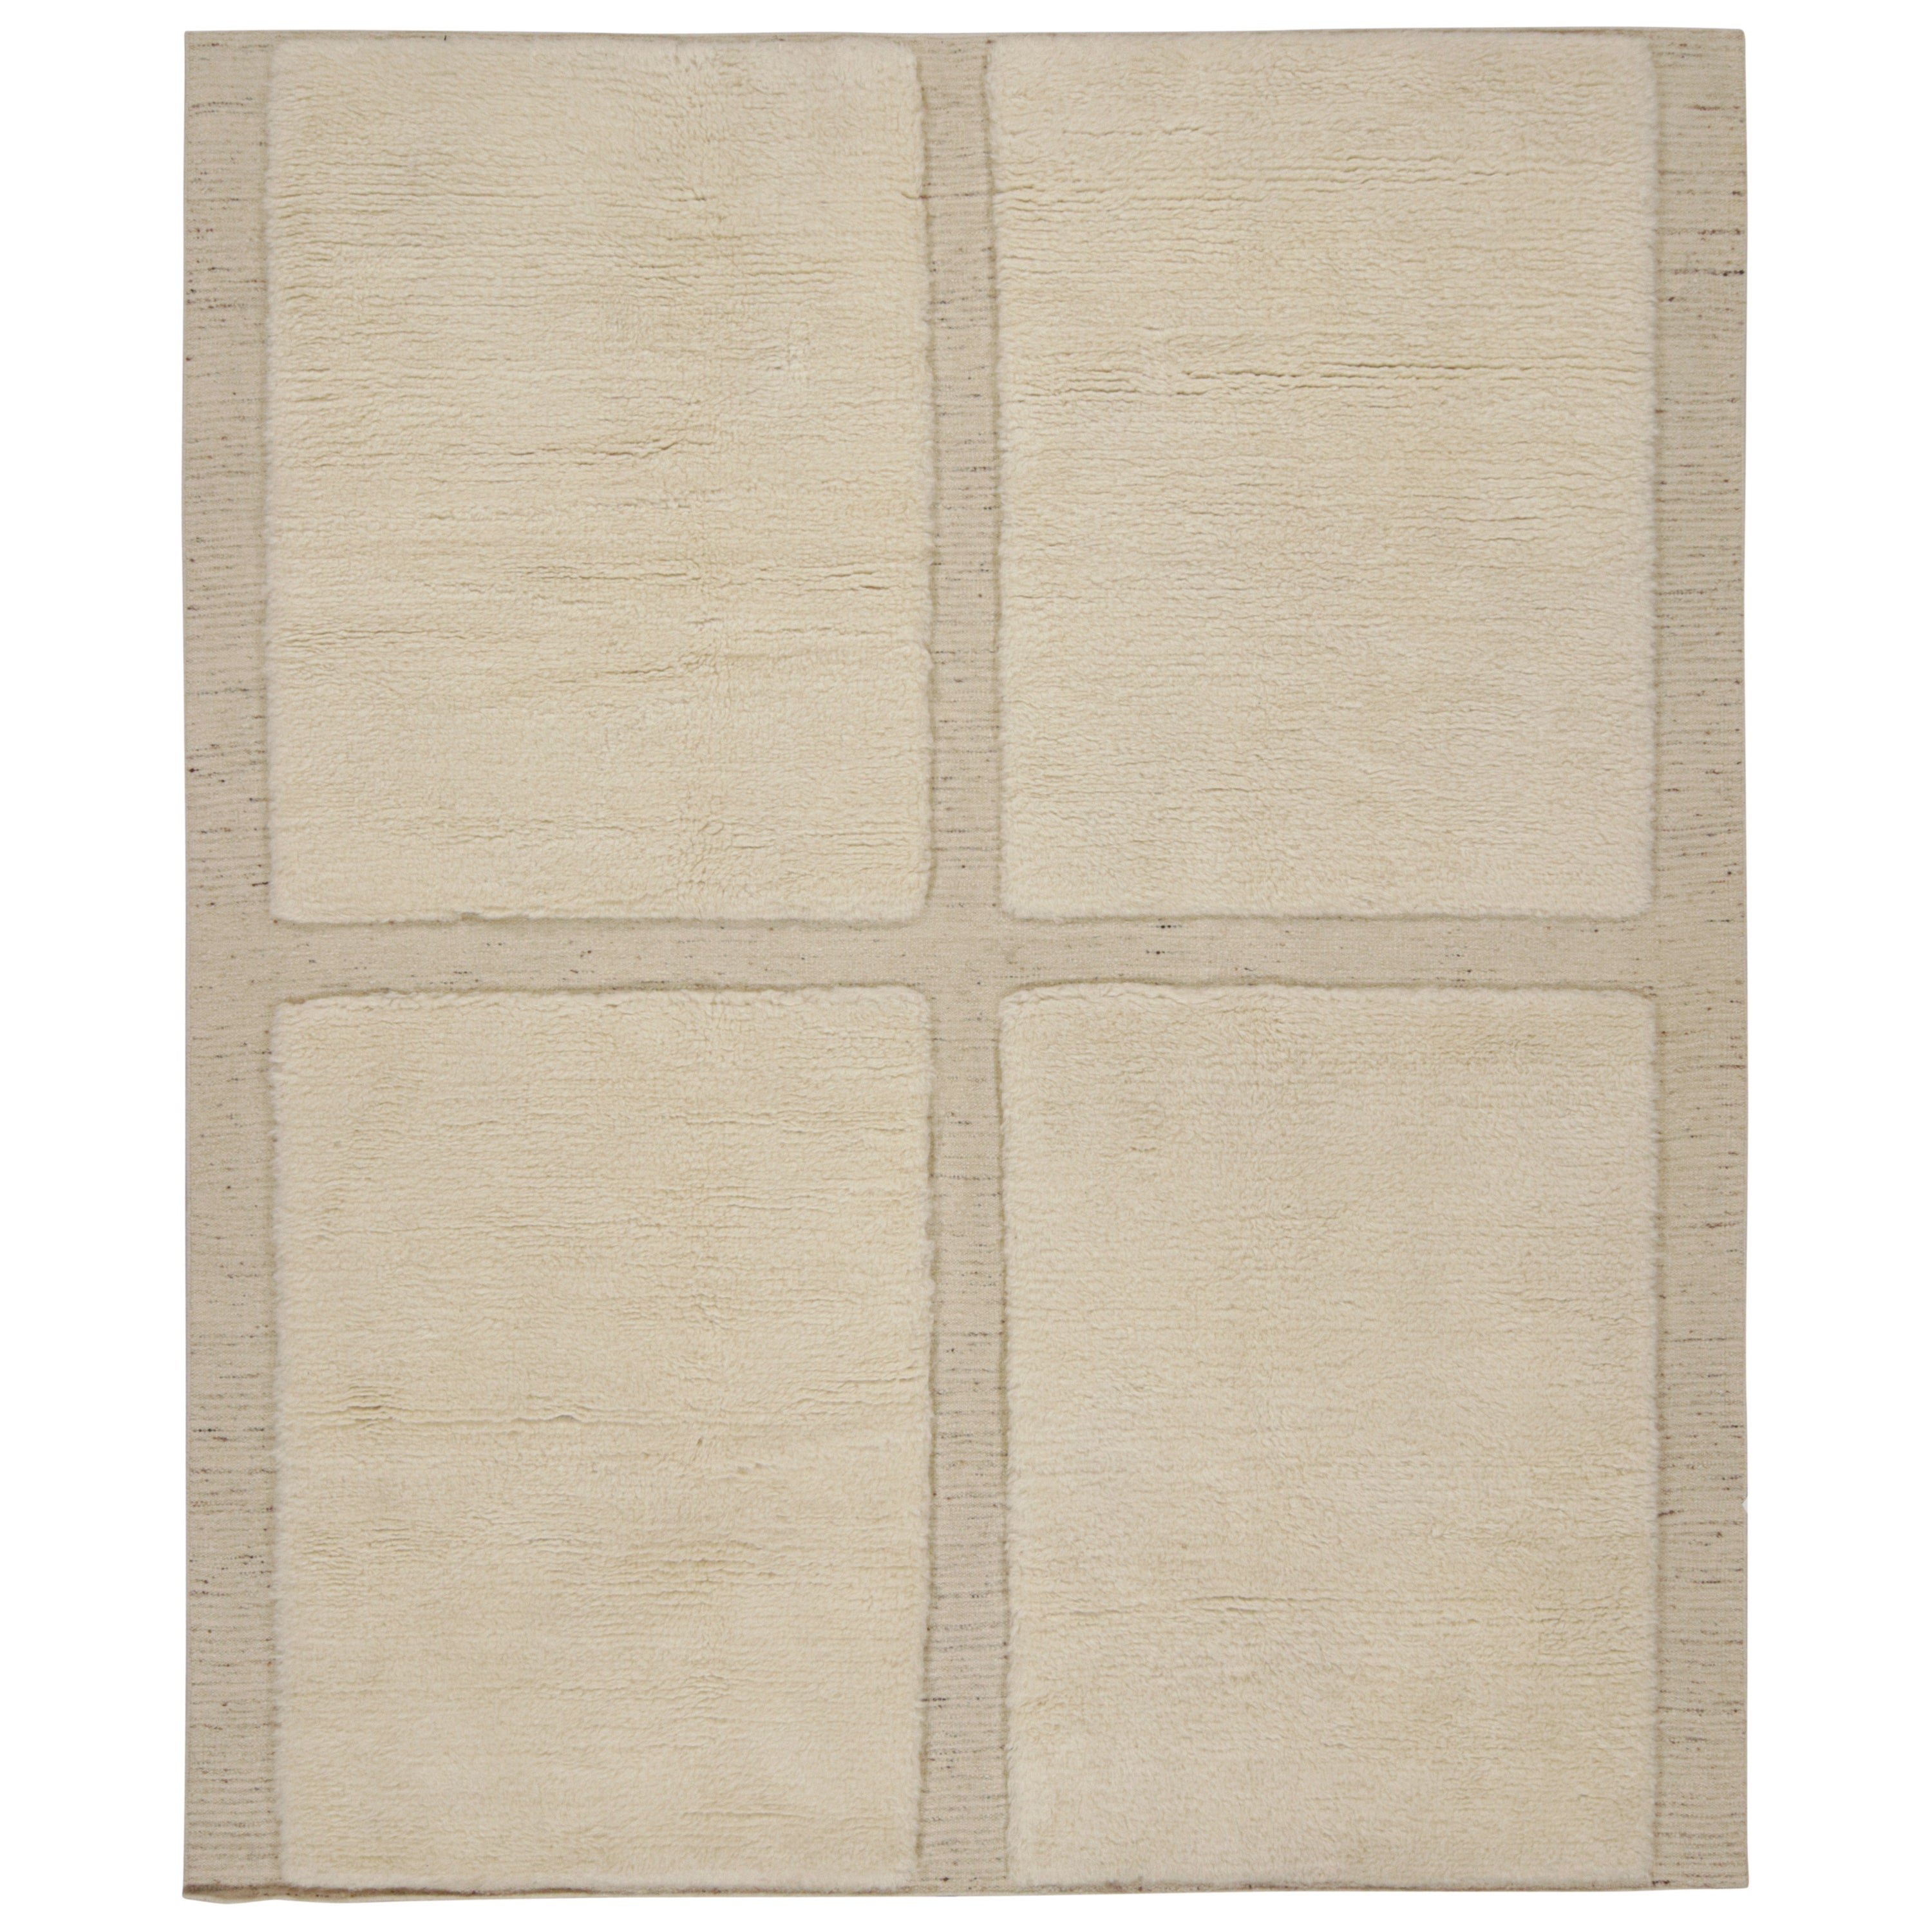 Rug & Kilim’s Moroccan Style Rug with Cream Tone High-Pile Geometric Patterns For Sale